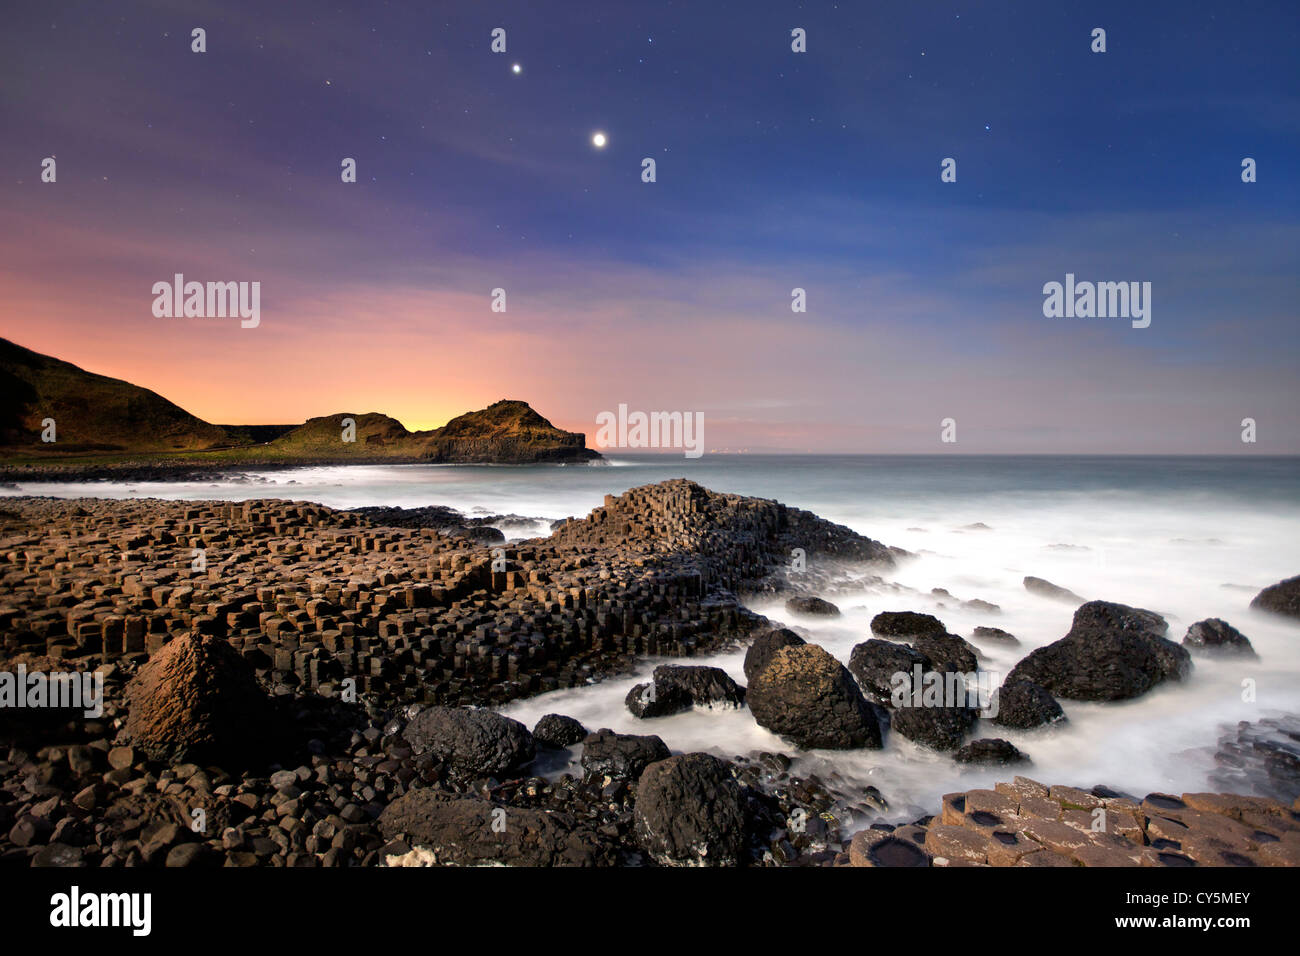 The Giants Causeway at night showing conjunction of Venus and Jupiter in sky. Stock Photo